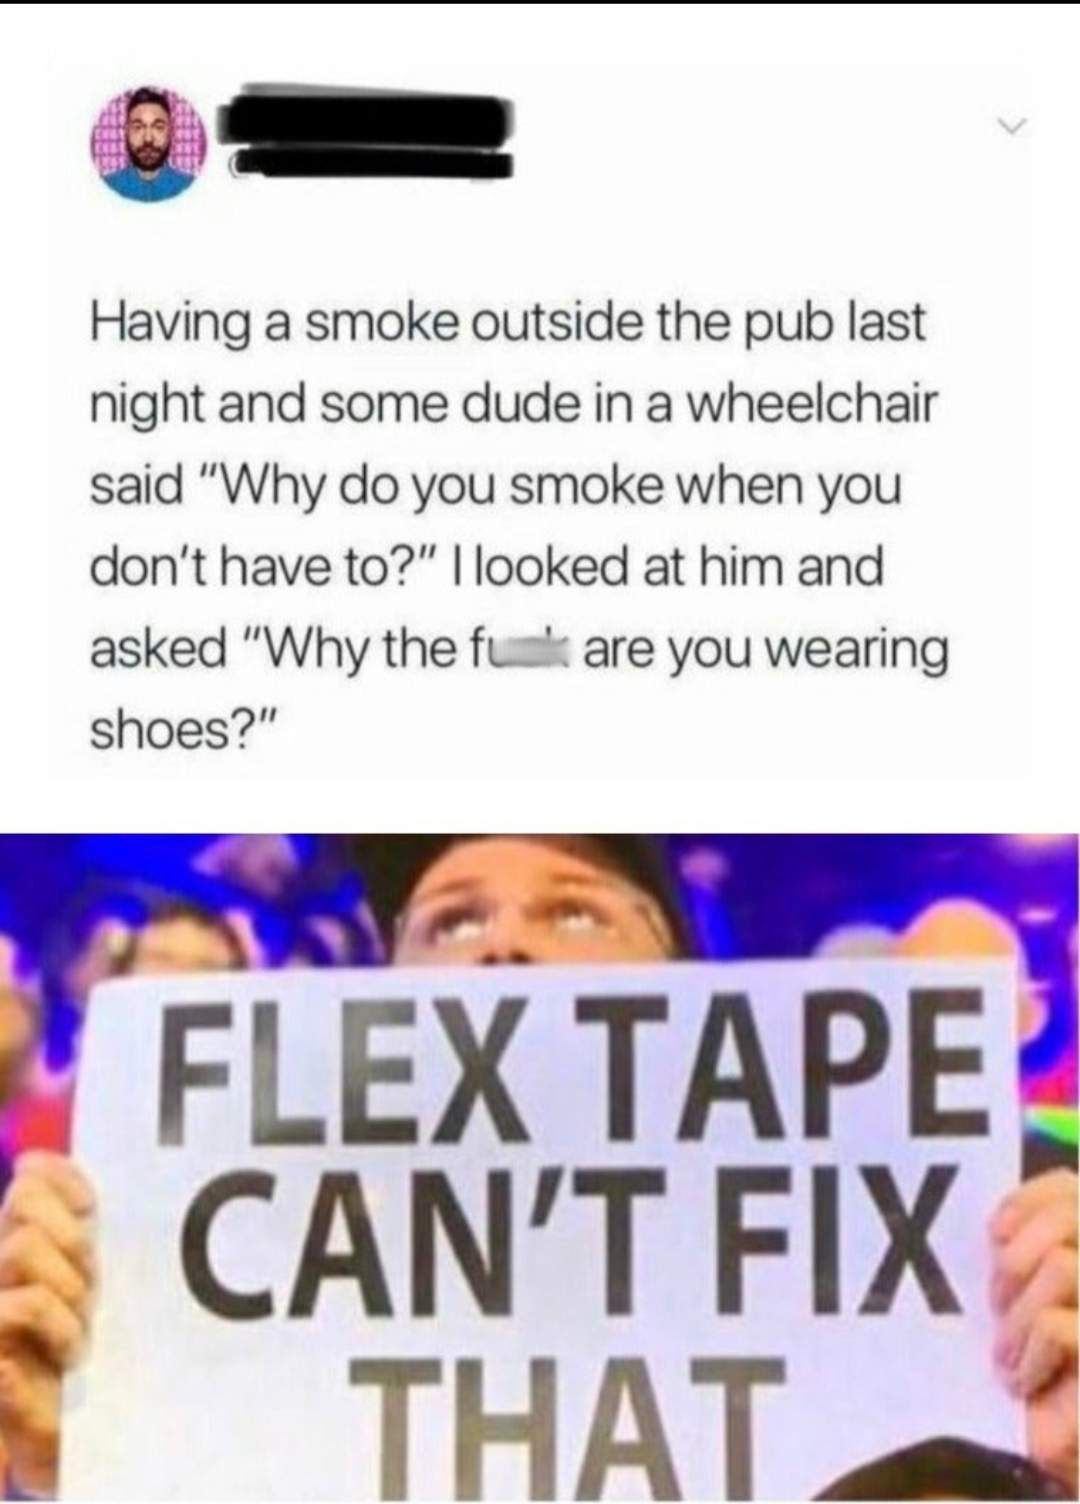 human behavior - Having a smoke outside the pub last night and some dude in a wheelchair said "Why do you smoke when you don't have to?" I looked at him and asked "Why the full are you wearing shoes?" Flex Tape Can'T Fix That